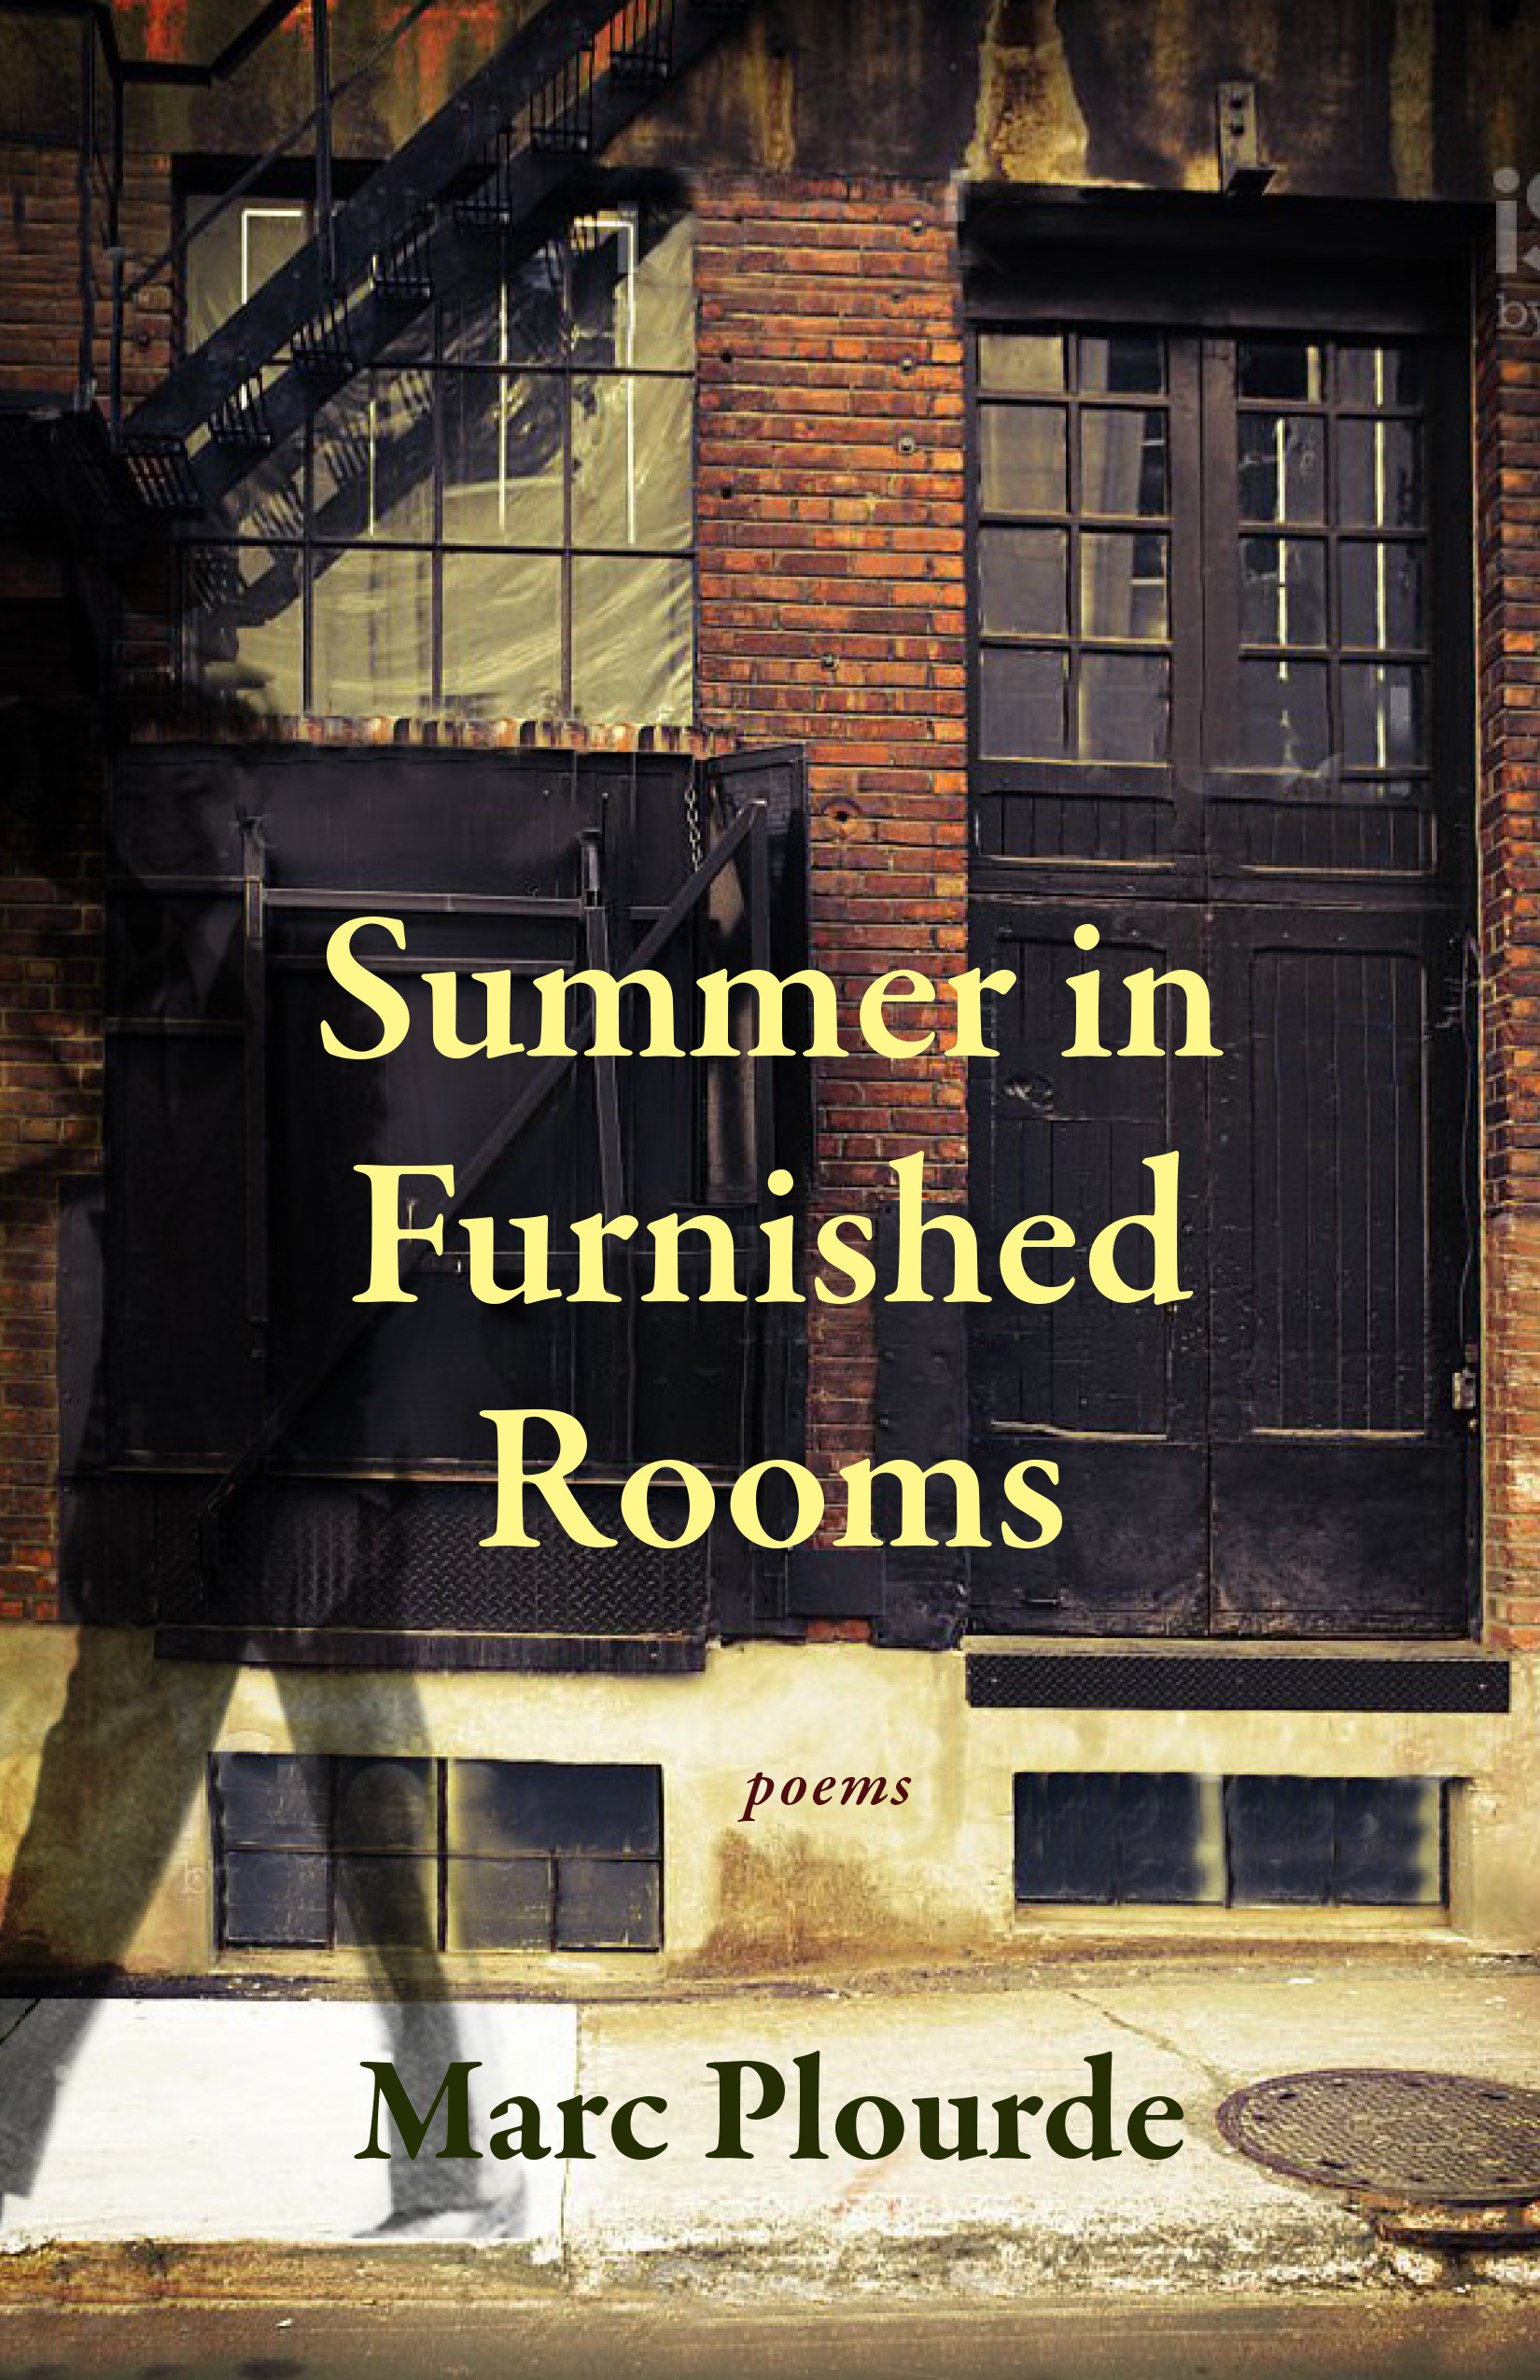 The cover of Summer in Furnished Rooms by Marc Plourde.